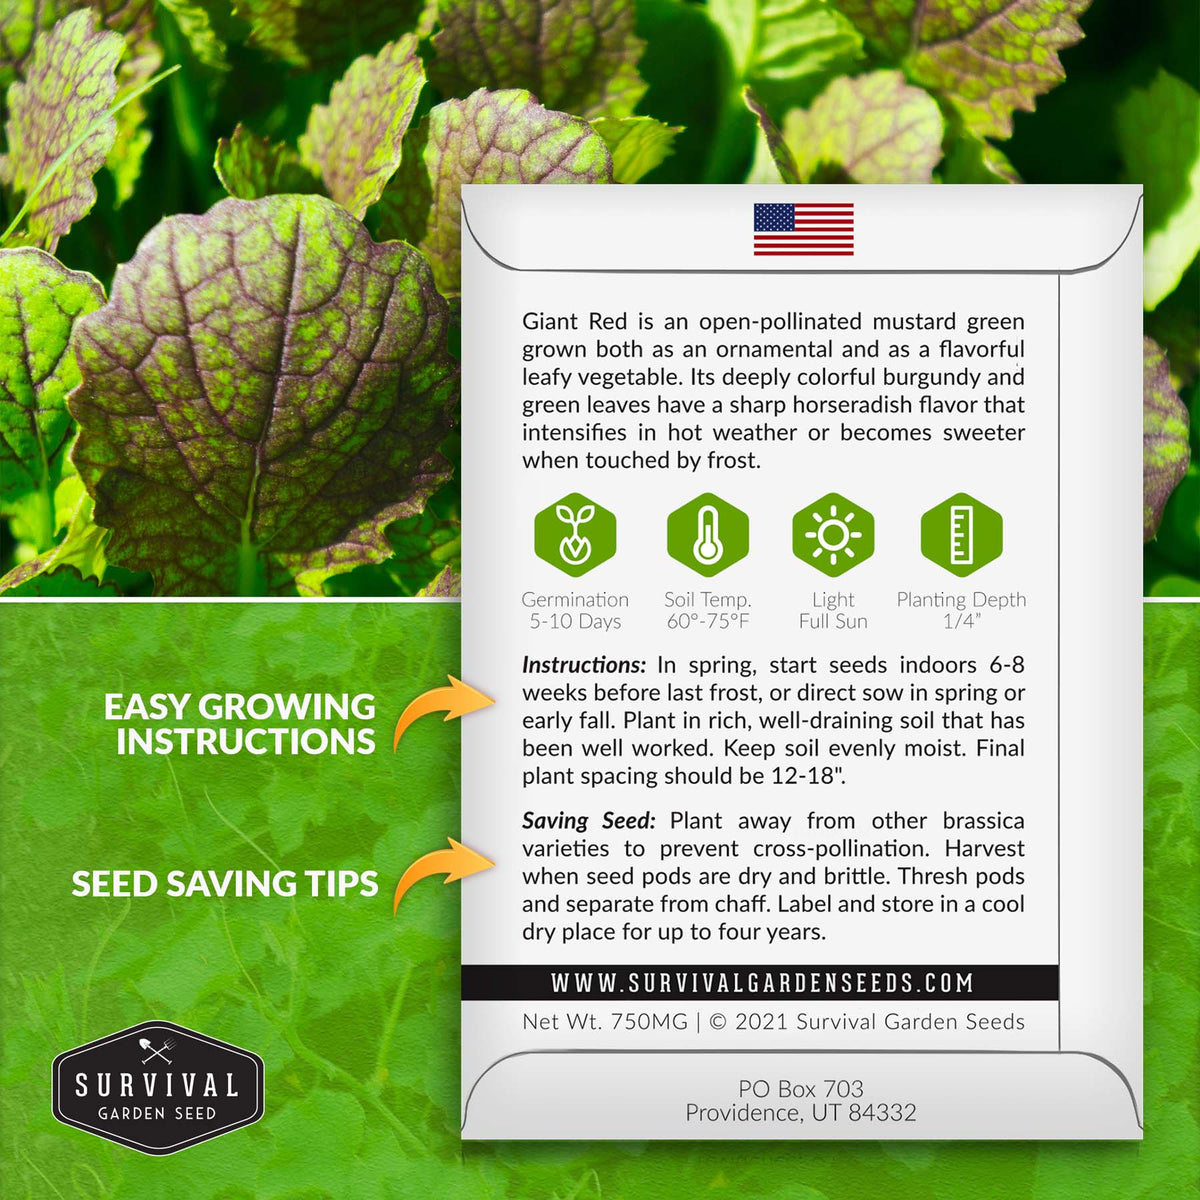 Giant Red Mustard Green seed planting instructions